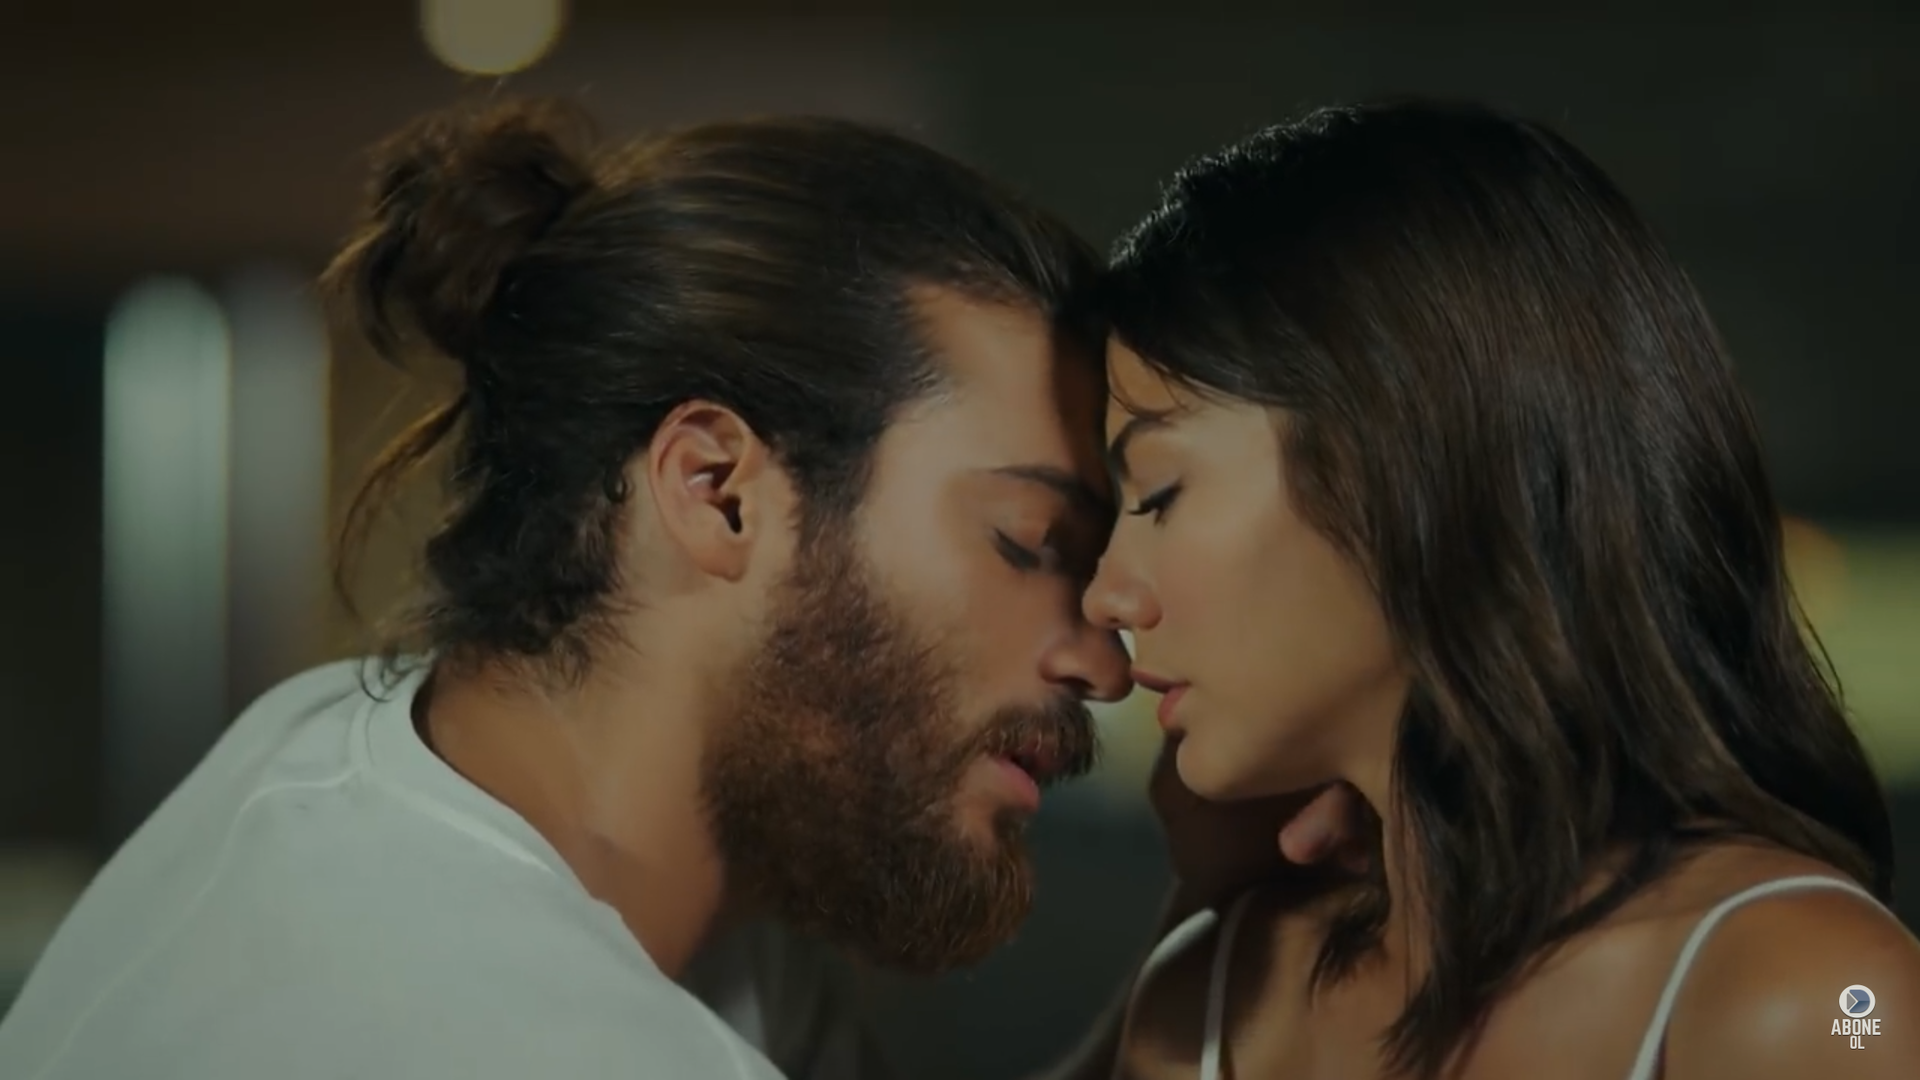 Can Divit, Erkenci Kus Early Bird & Can Divit, May 2020